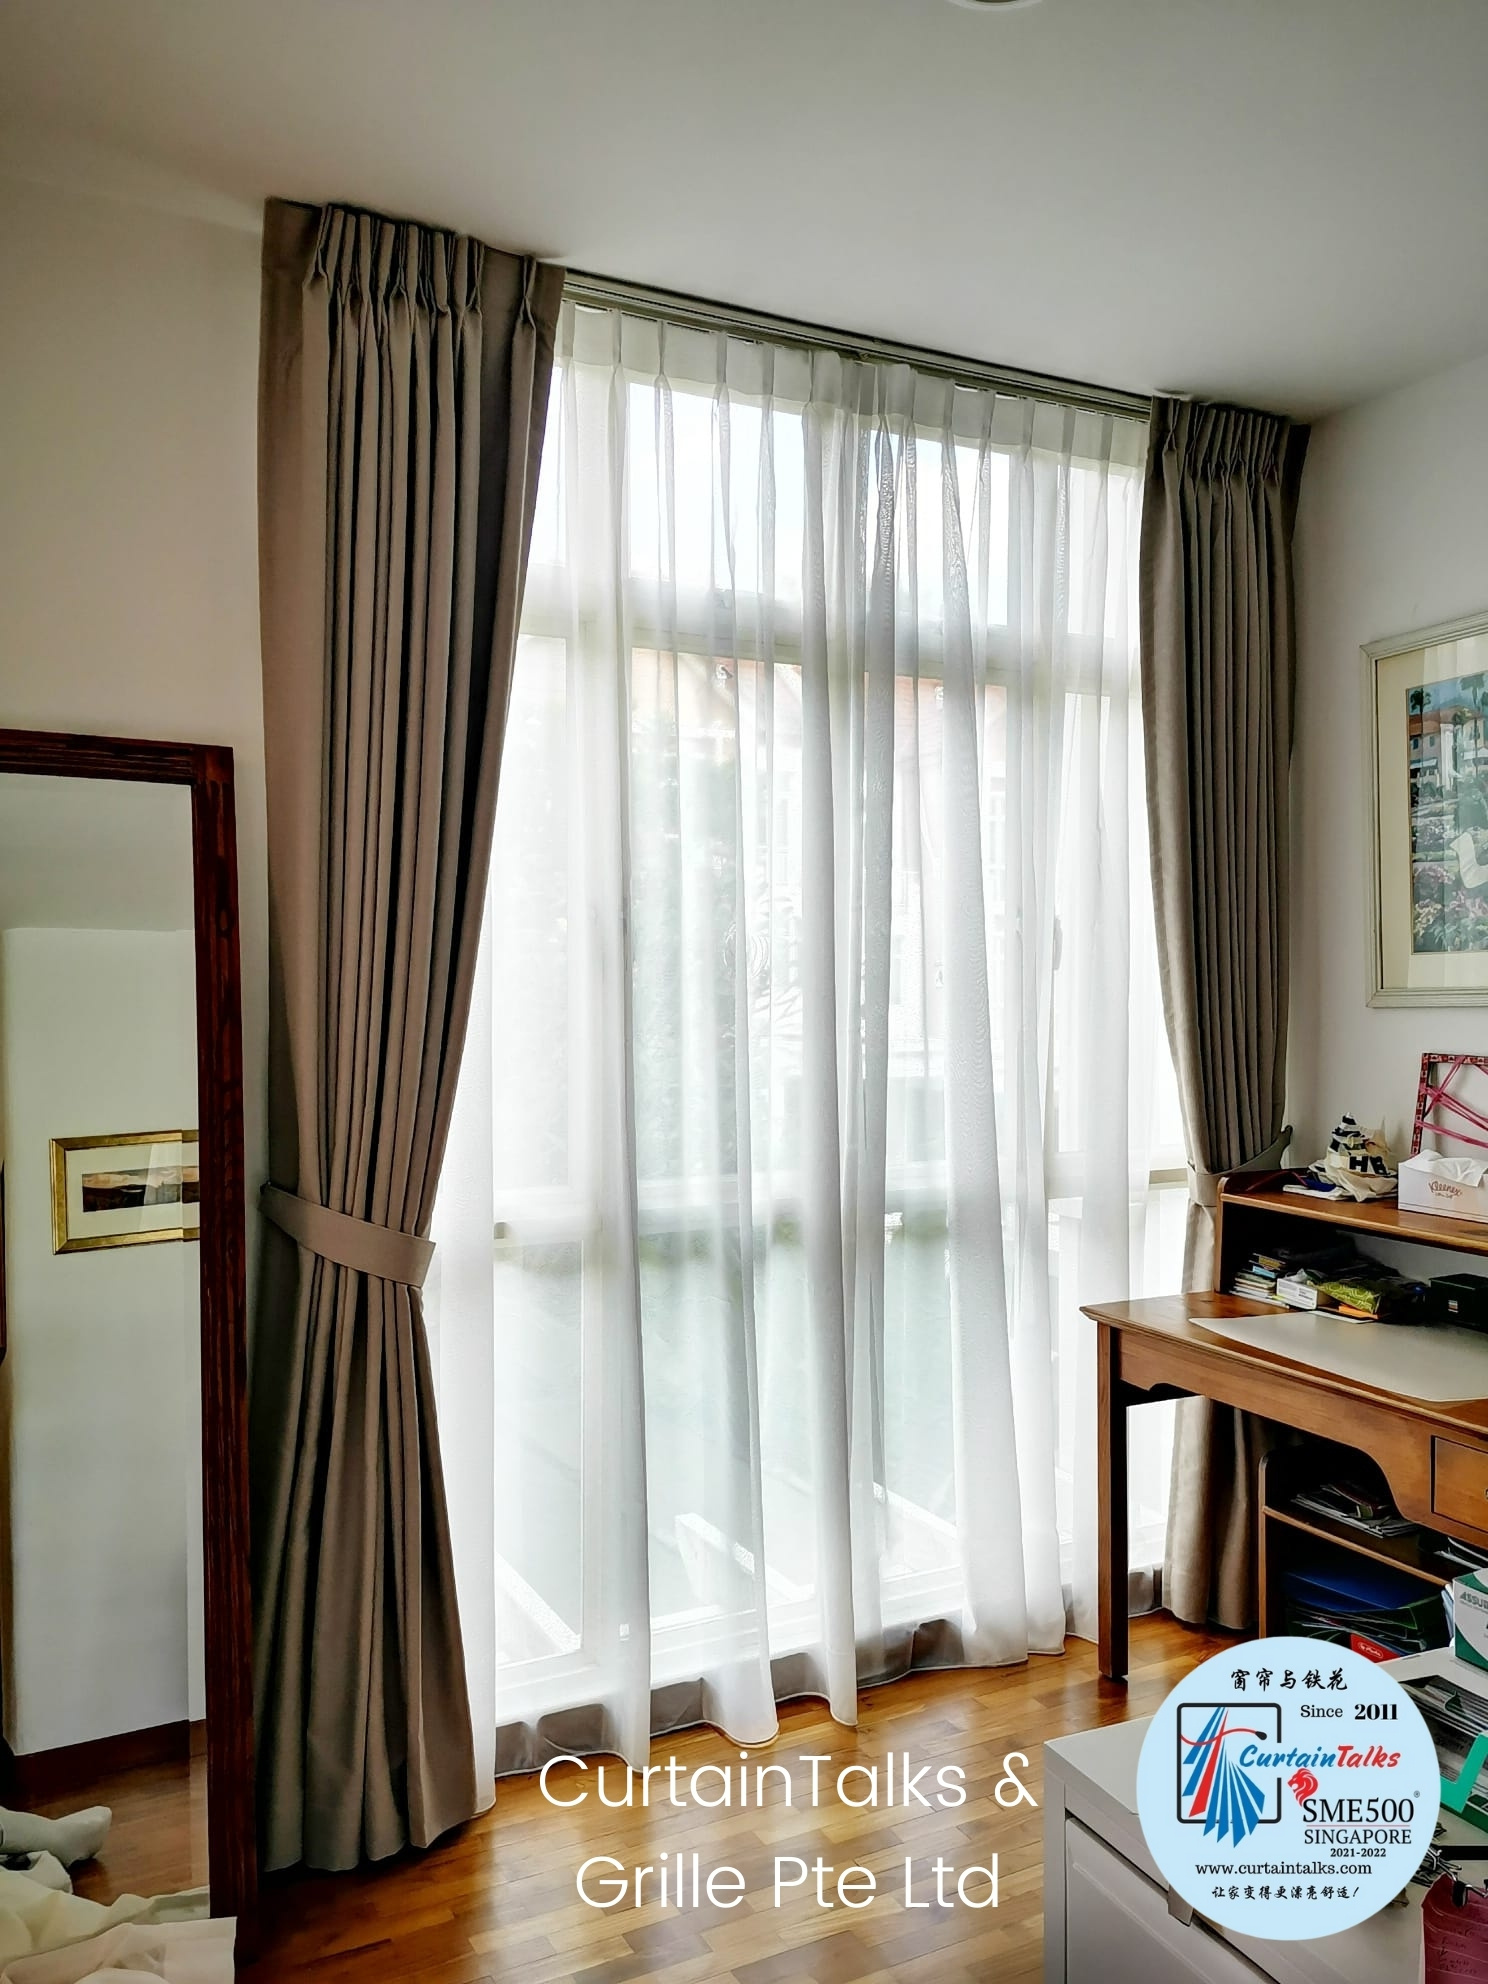 This is a Picture of Day and night curtain picture  for Singapore landed, study room, day an dnight curtain,, Wood groove